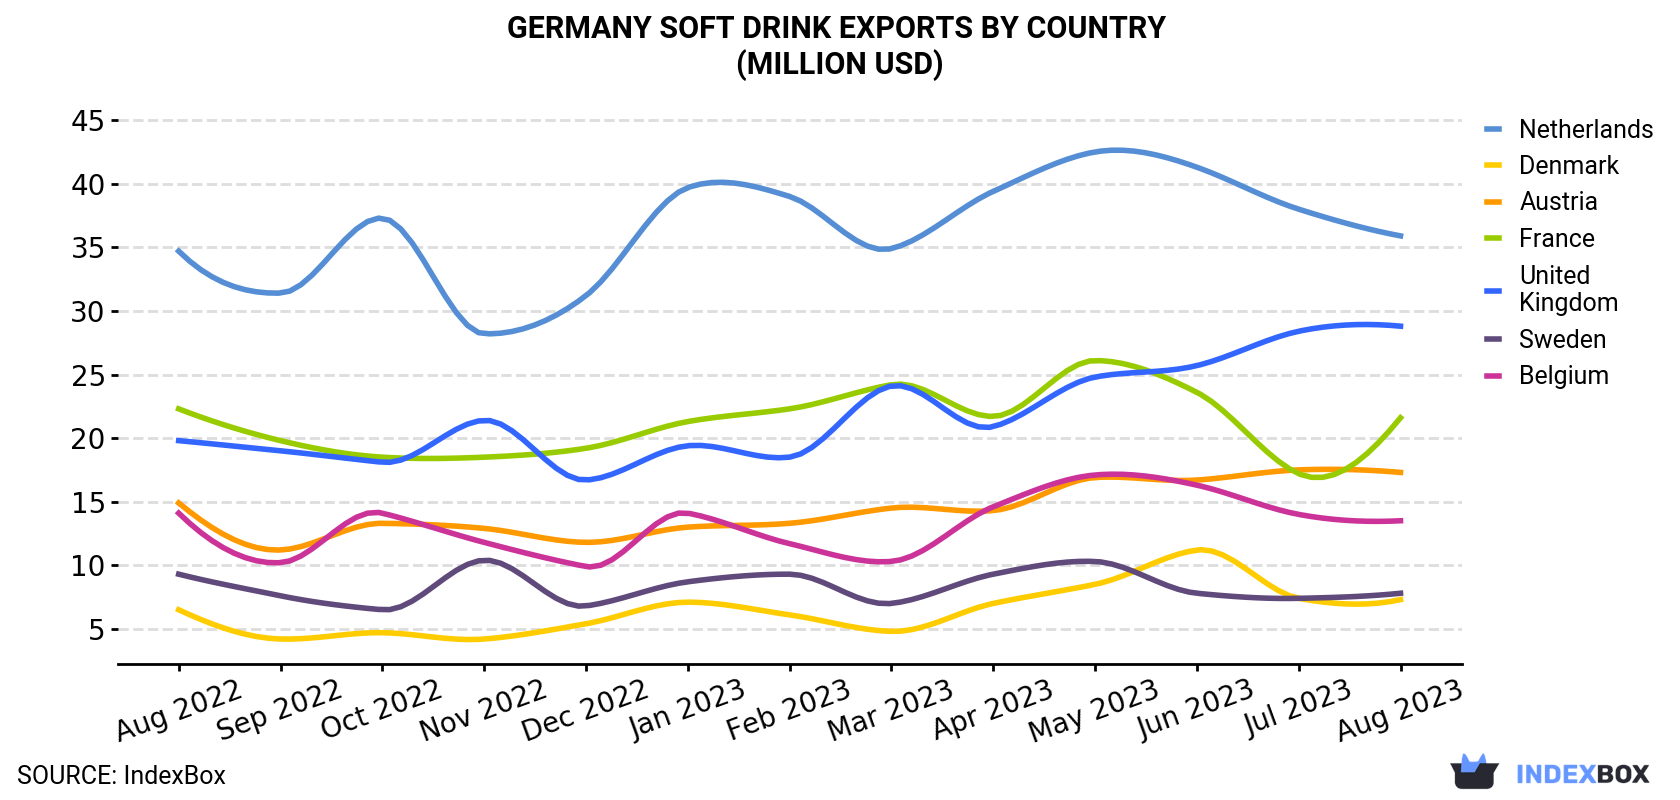 Germany Soft Drink Exports By Country (Million USD)